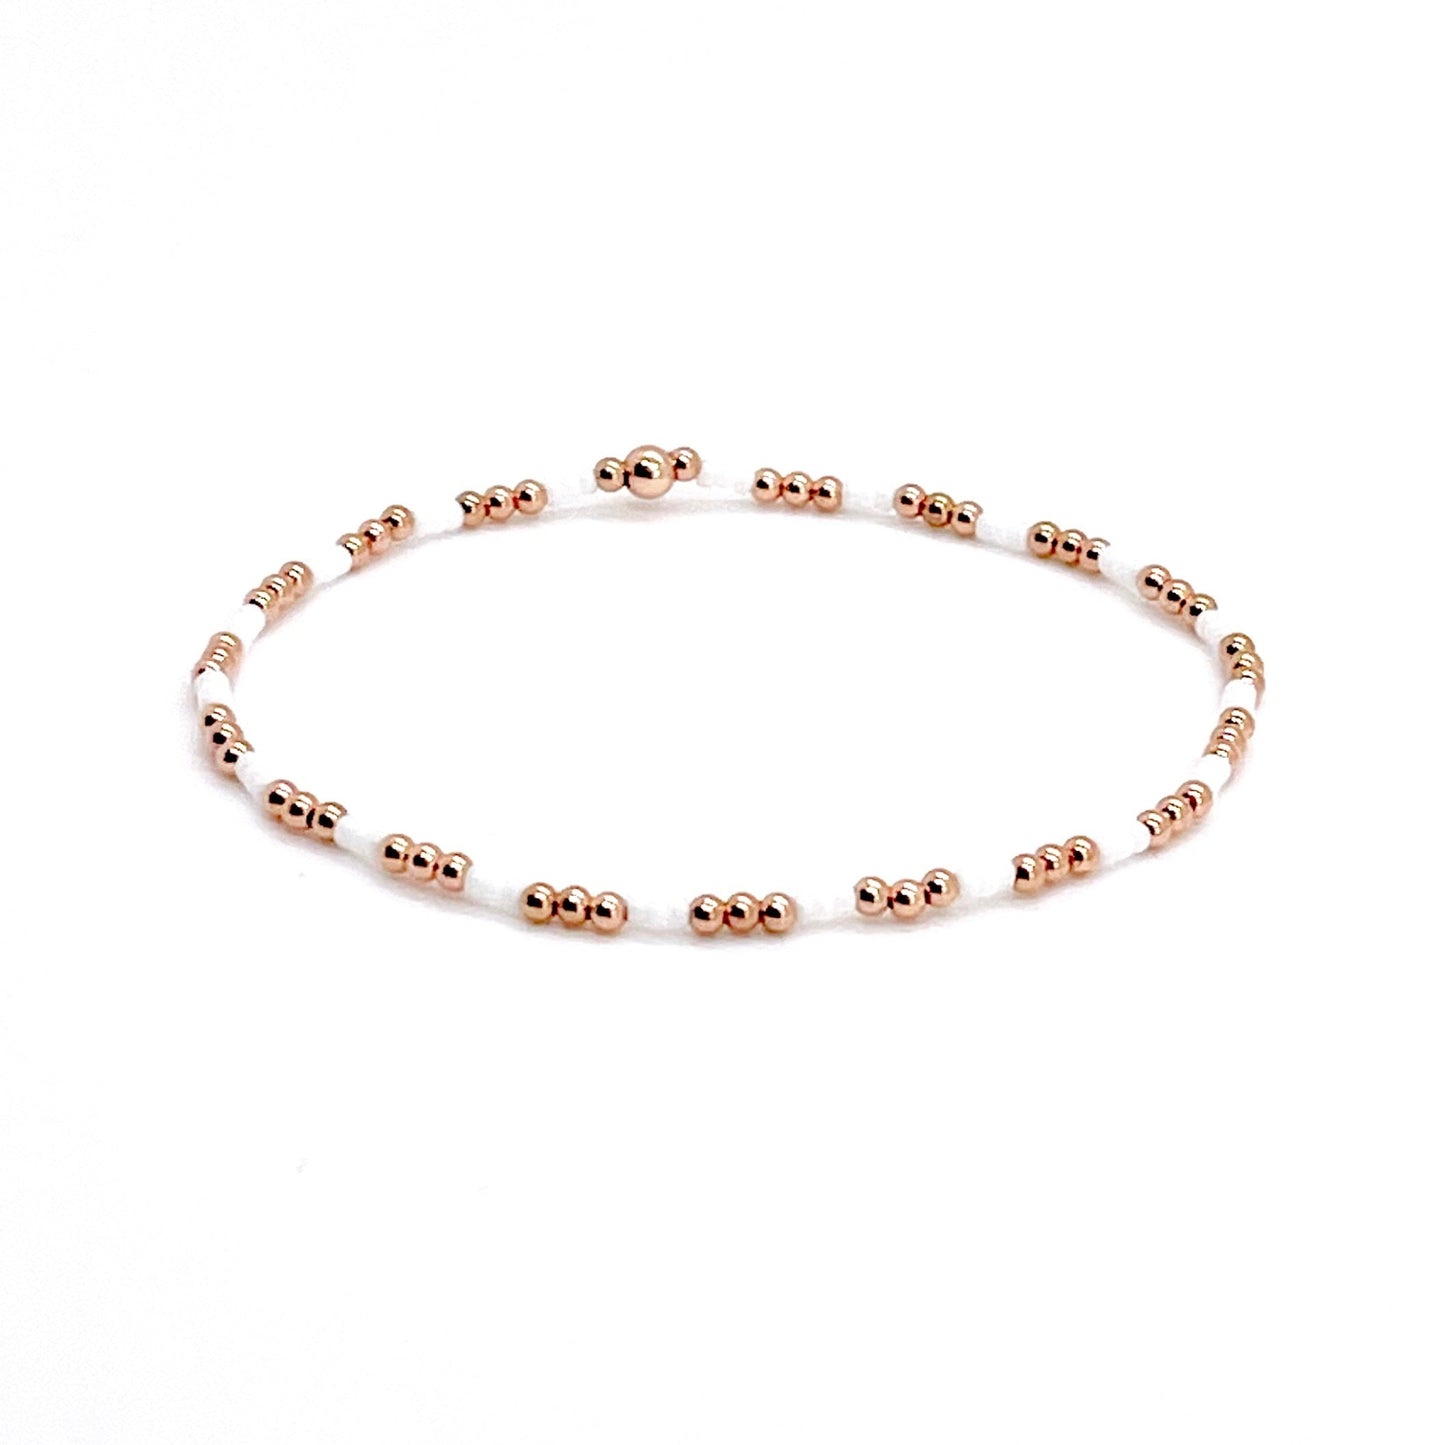 White bead bracelet with small 2mm rose gold beads on stretch cord.